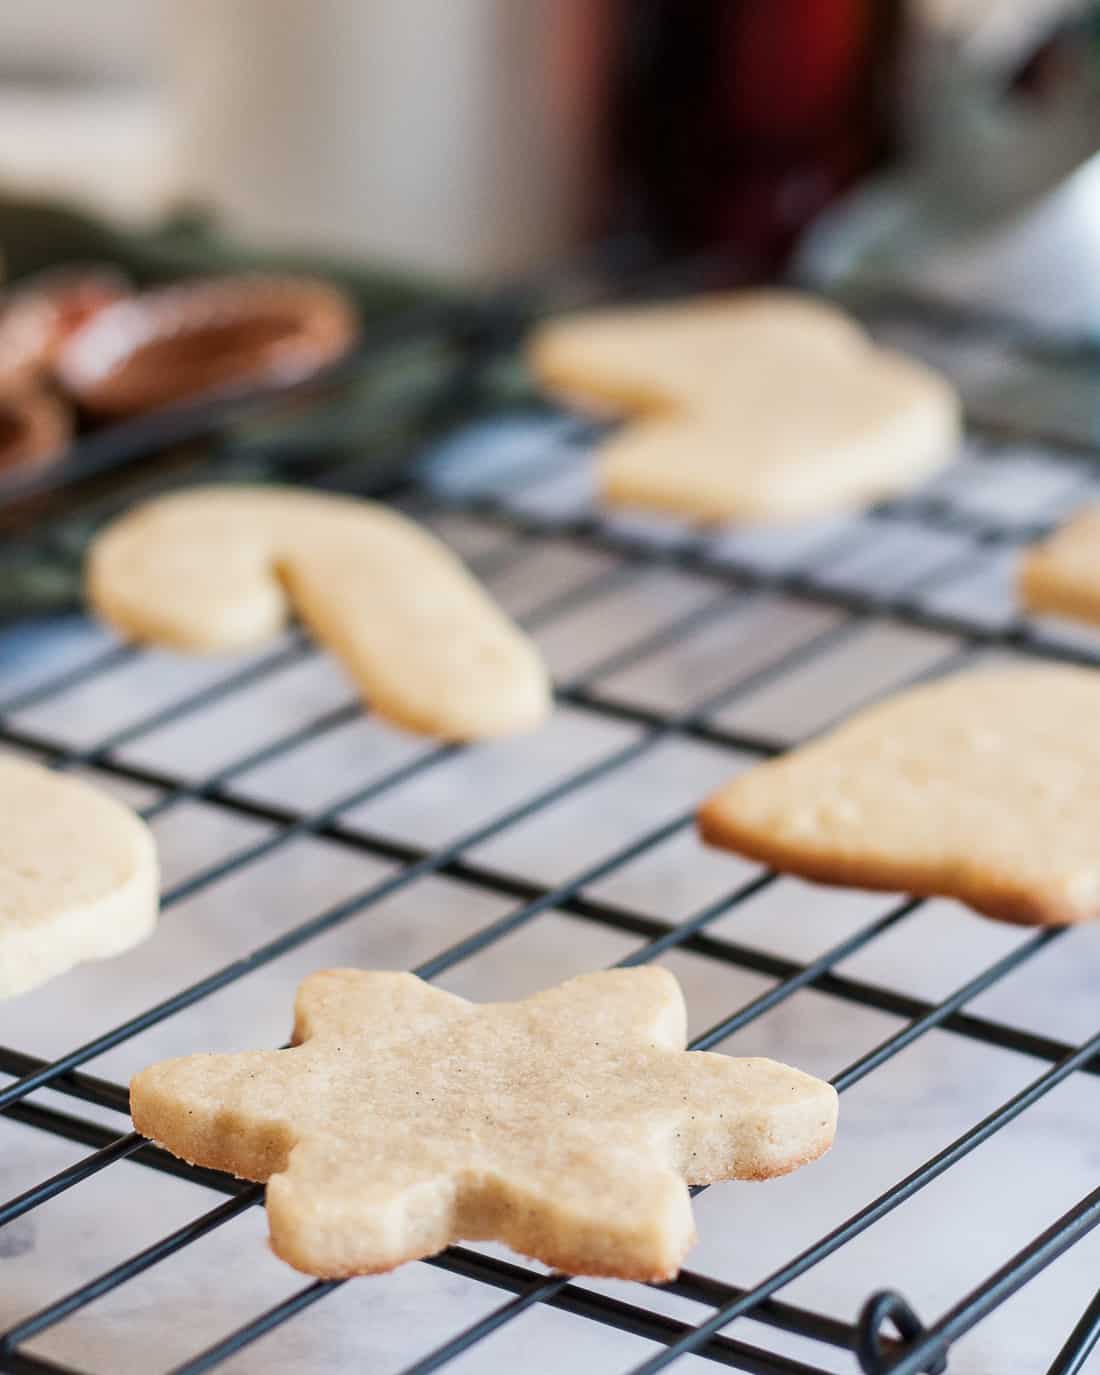 Soft, yet still able to hold their shape, these cut out sugar cookies have been my go-to recipe for years. This recipe is an excellent base for a variety of flavor variations for decorated sugar cookies! * Recipe on GoodieGodmother.com